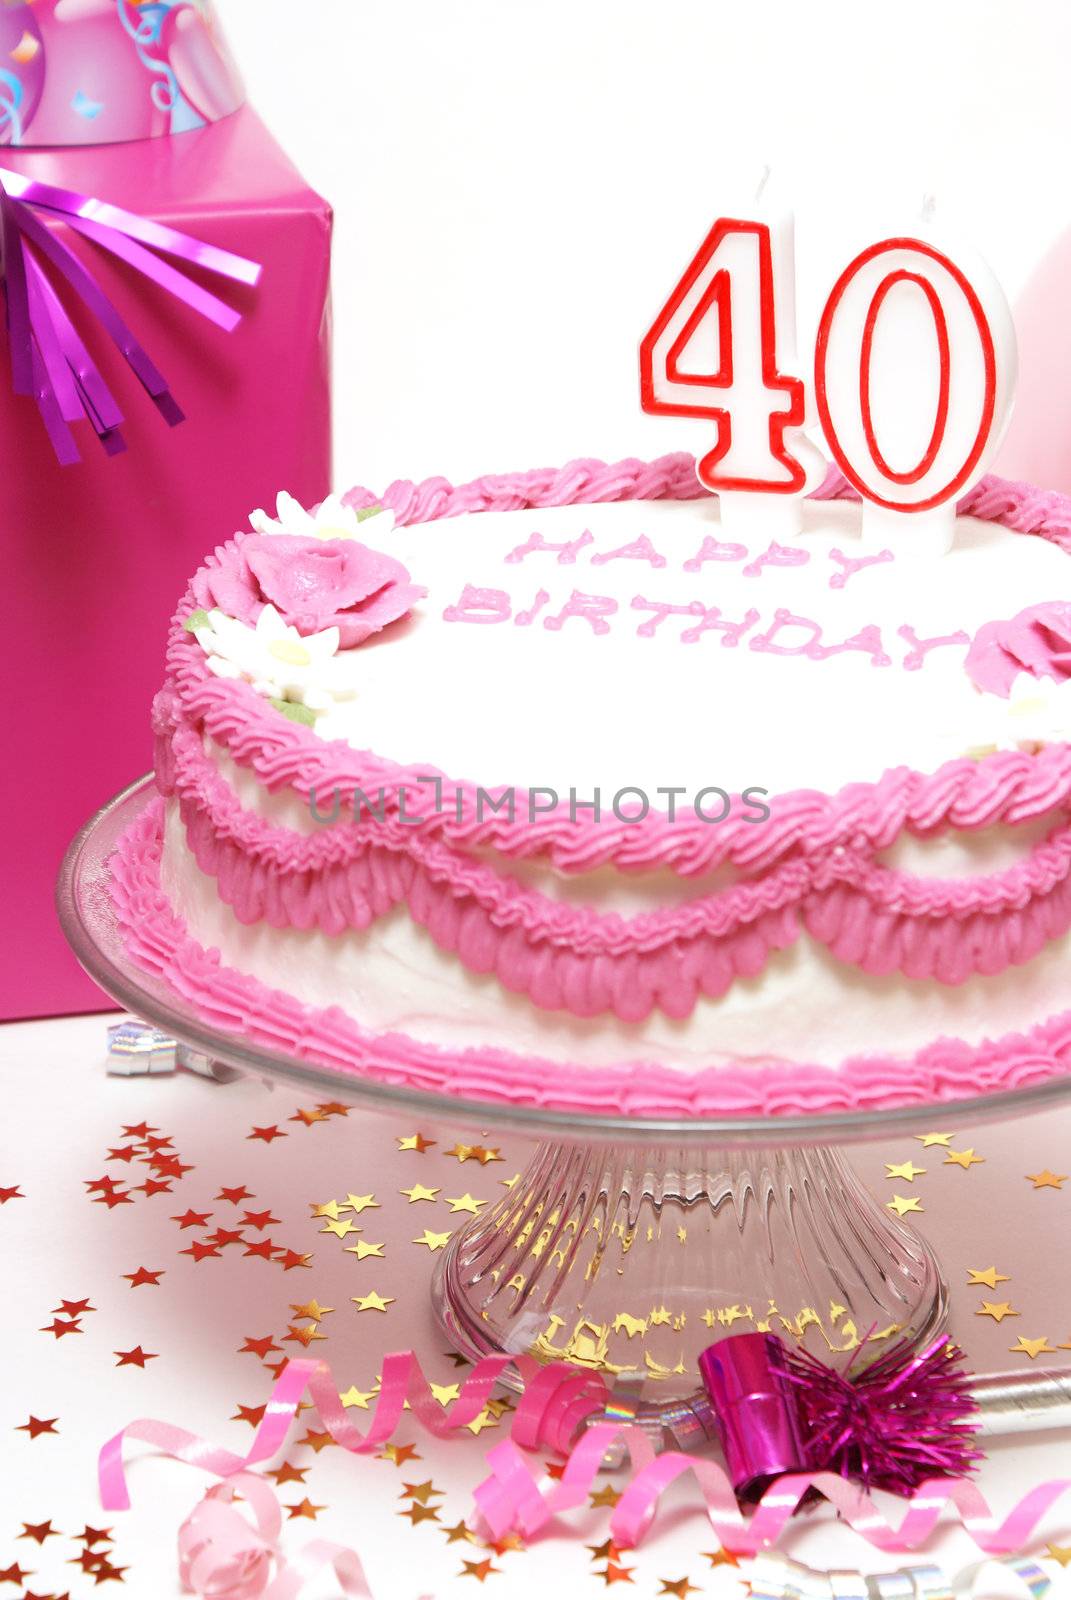 A 40th birthday cake to celebrate someones special day.